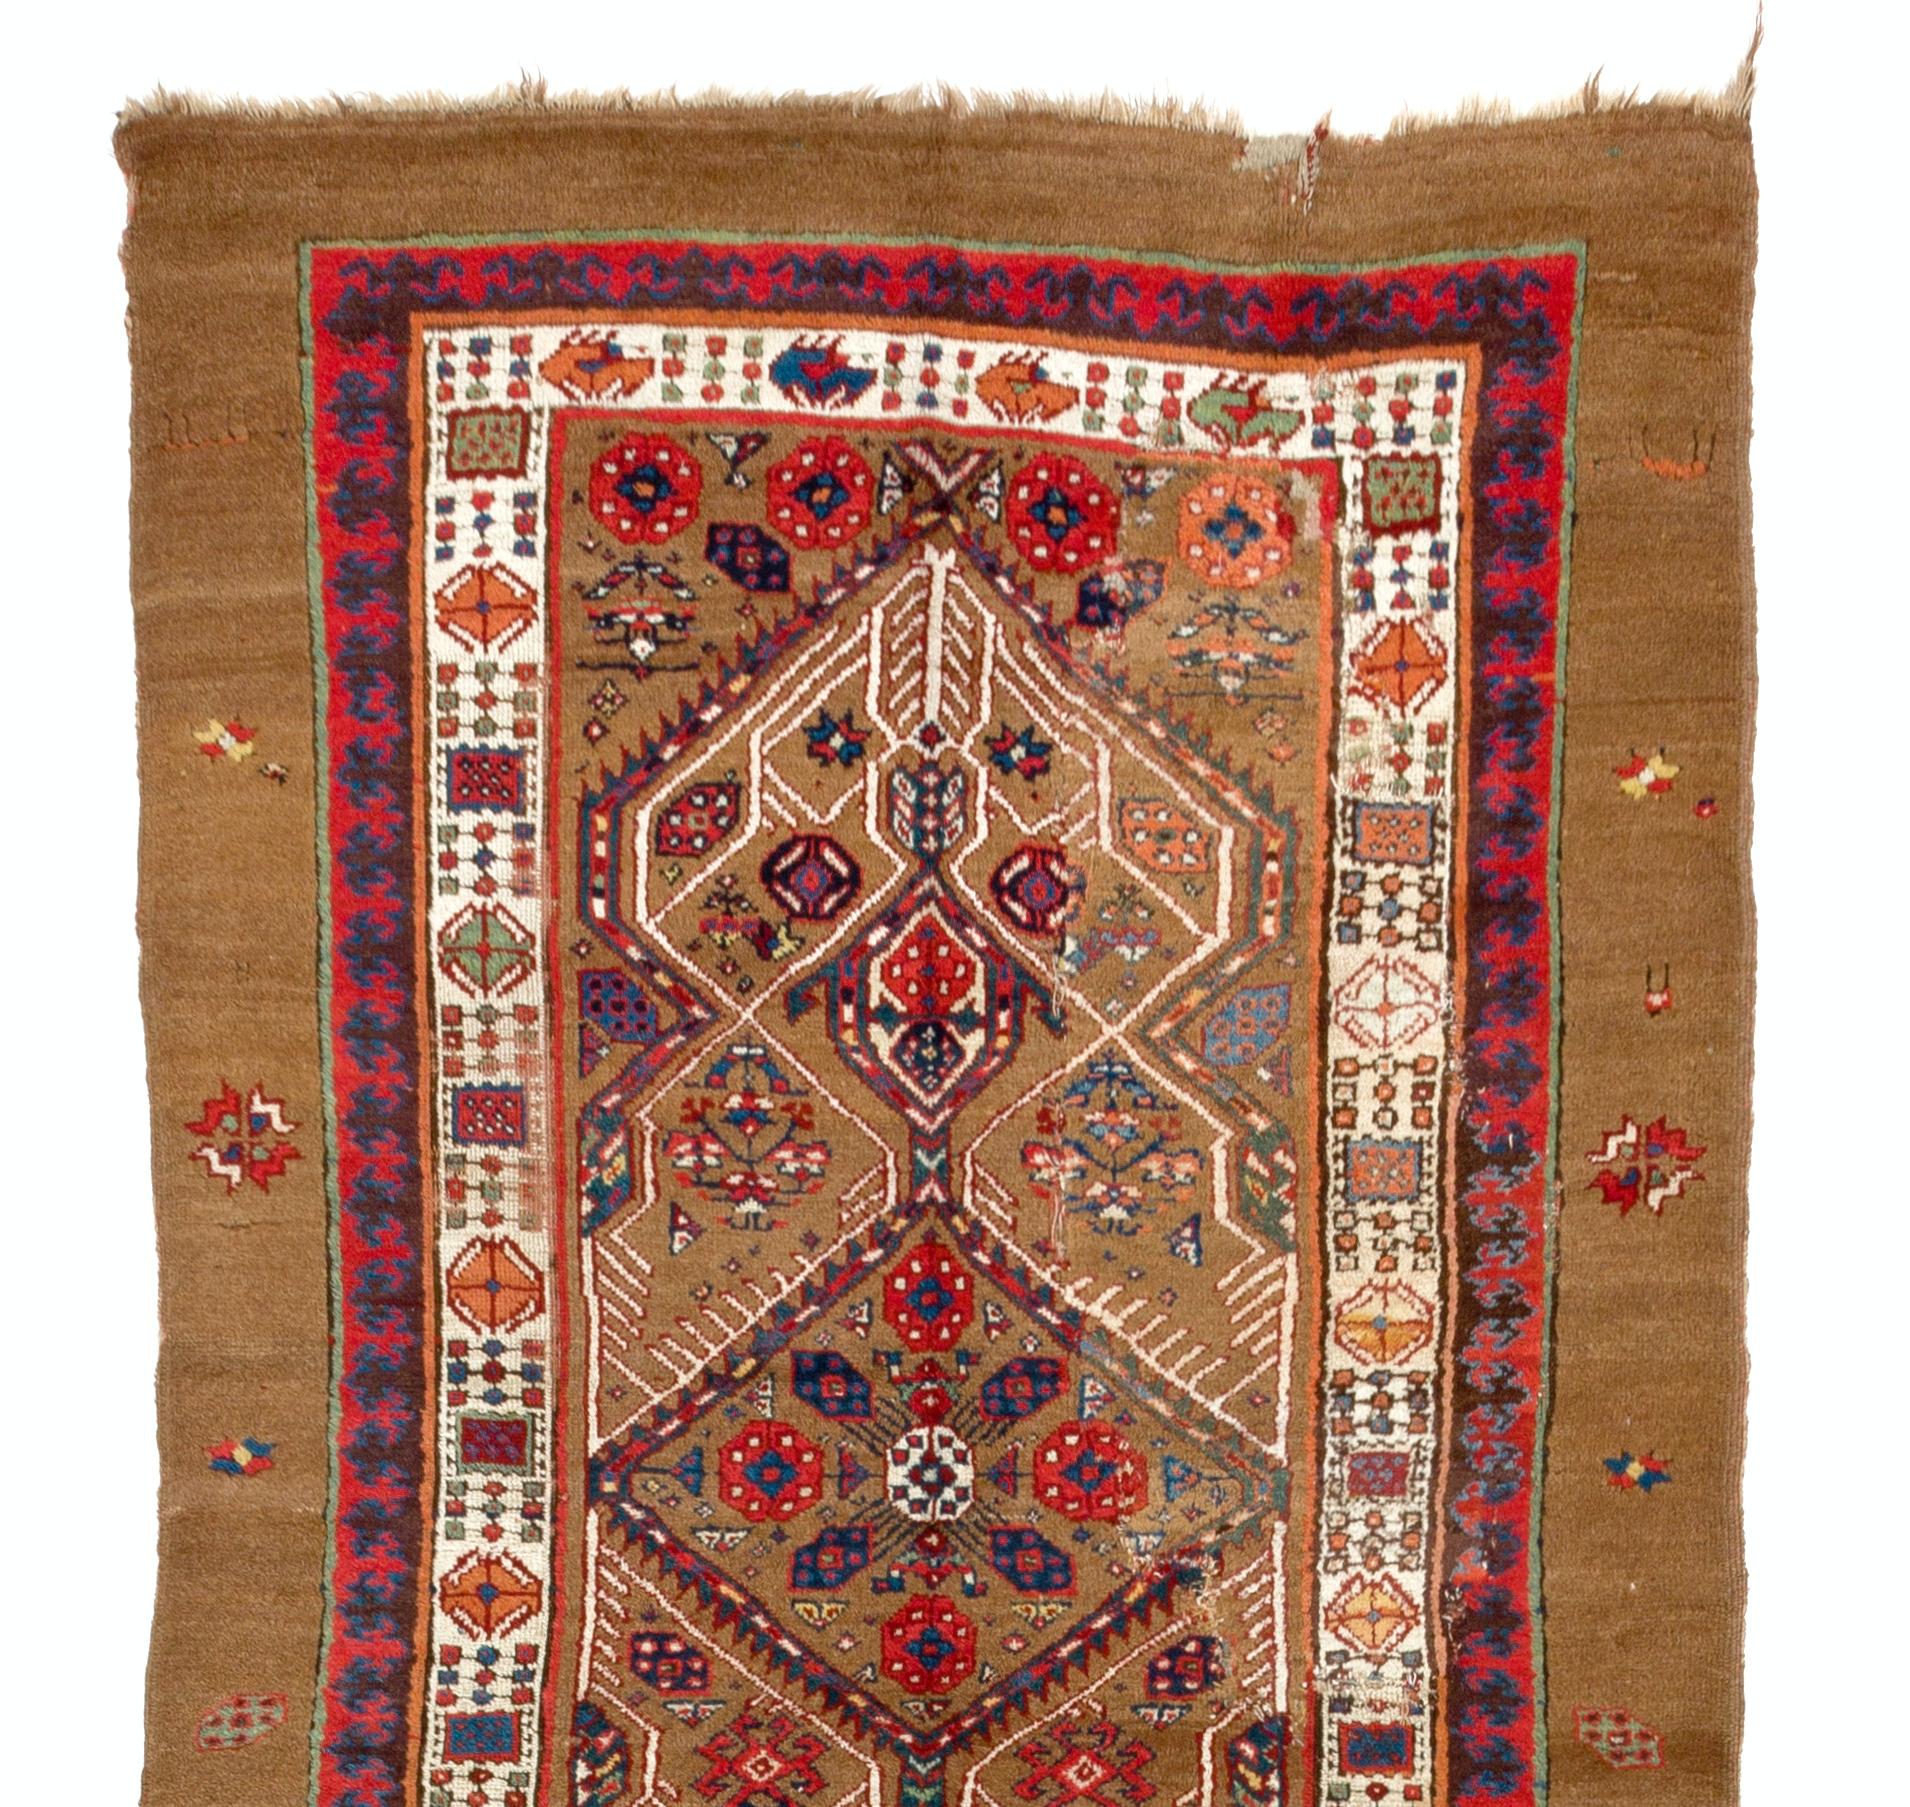 An antique Serab camel hair runner rug, Northwest Persian. Finely hand-knotted with even medium wool pile on wool foundation. Very good condition. Sturdy and as clean as a brand new rug (deep washed professionally).
Size: 4 x 12.4 ft.